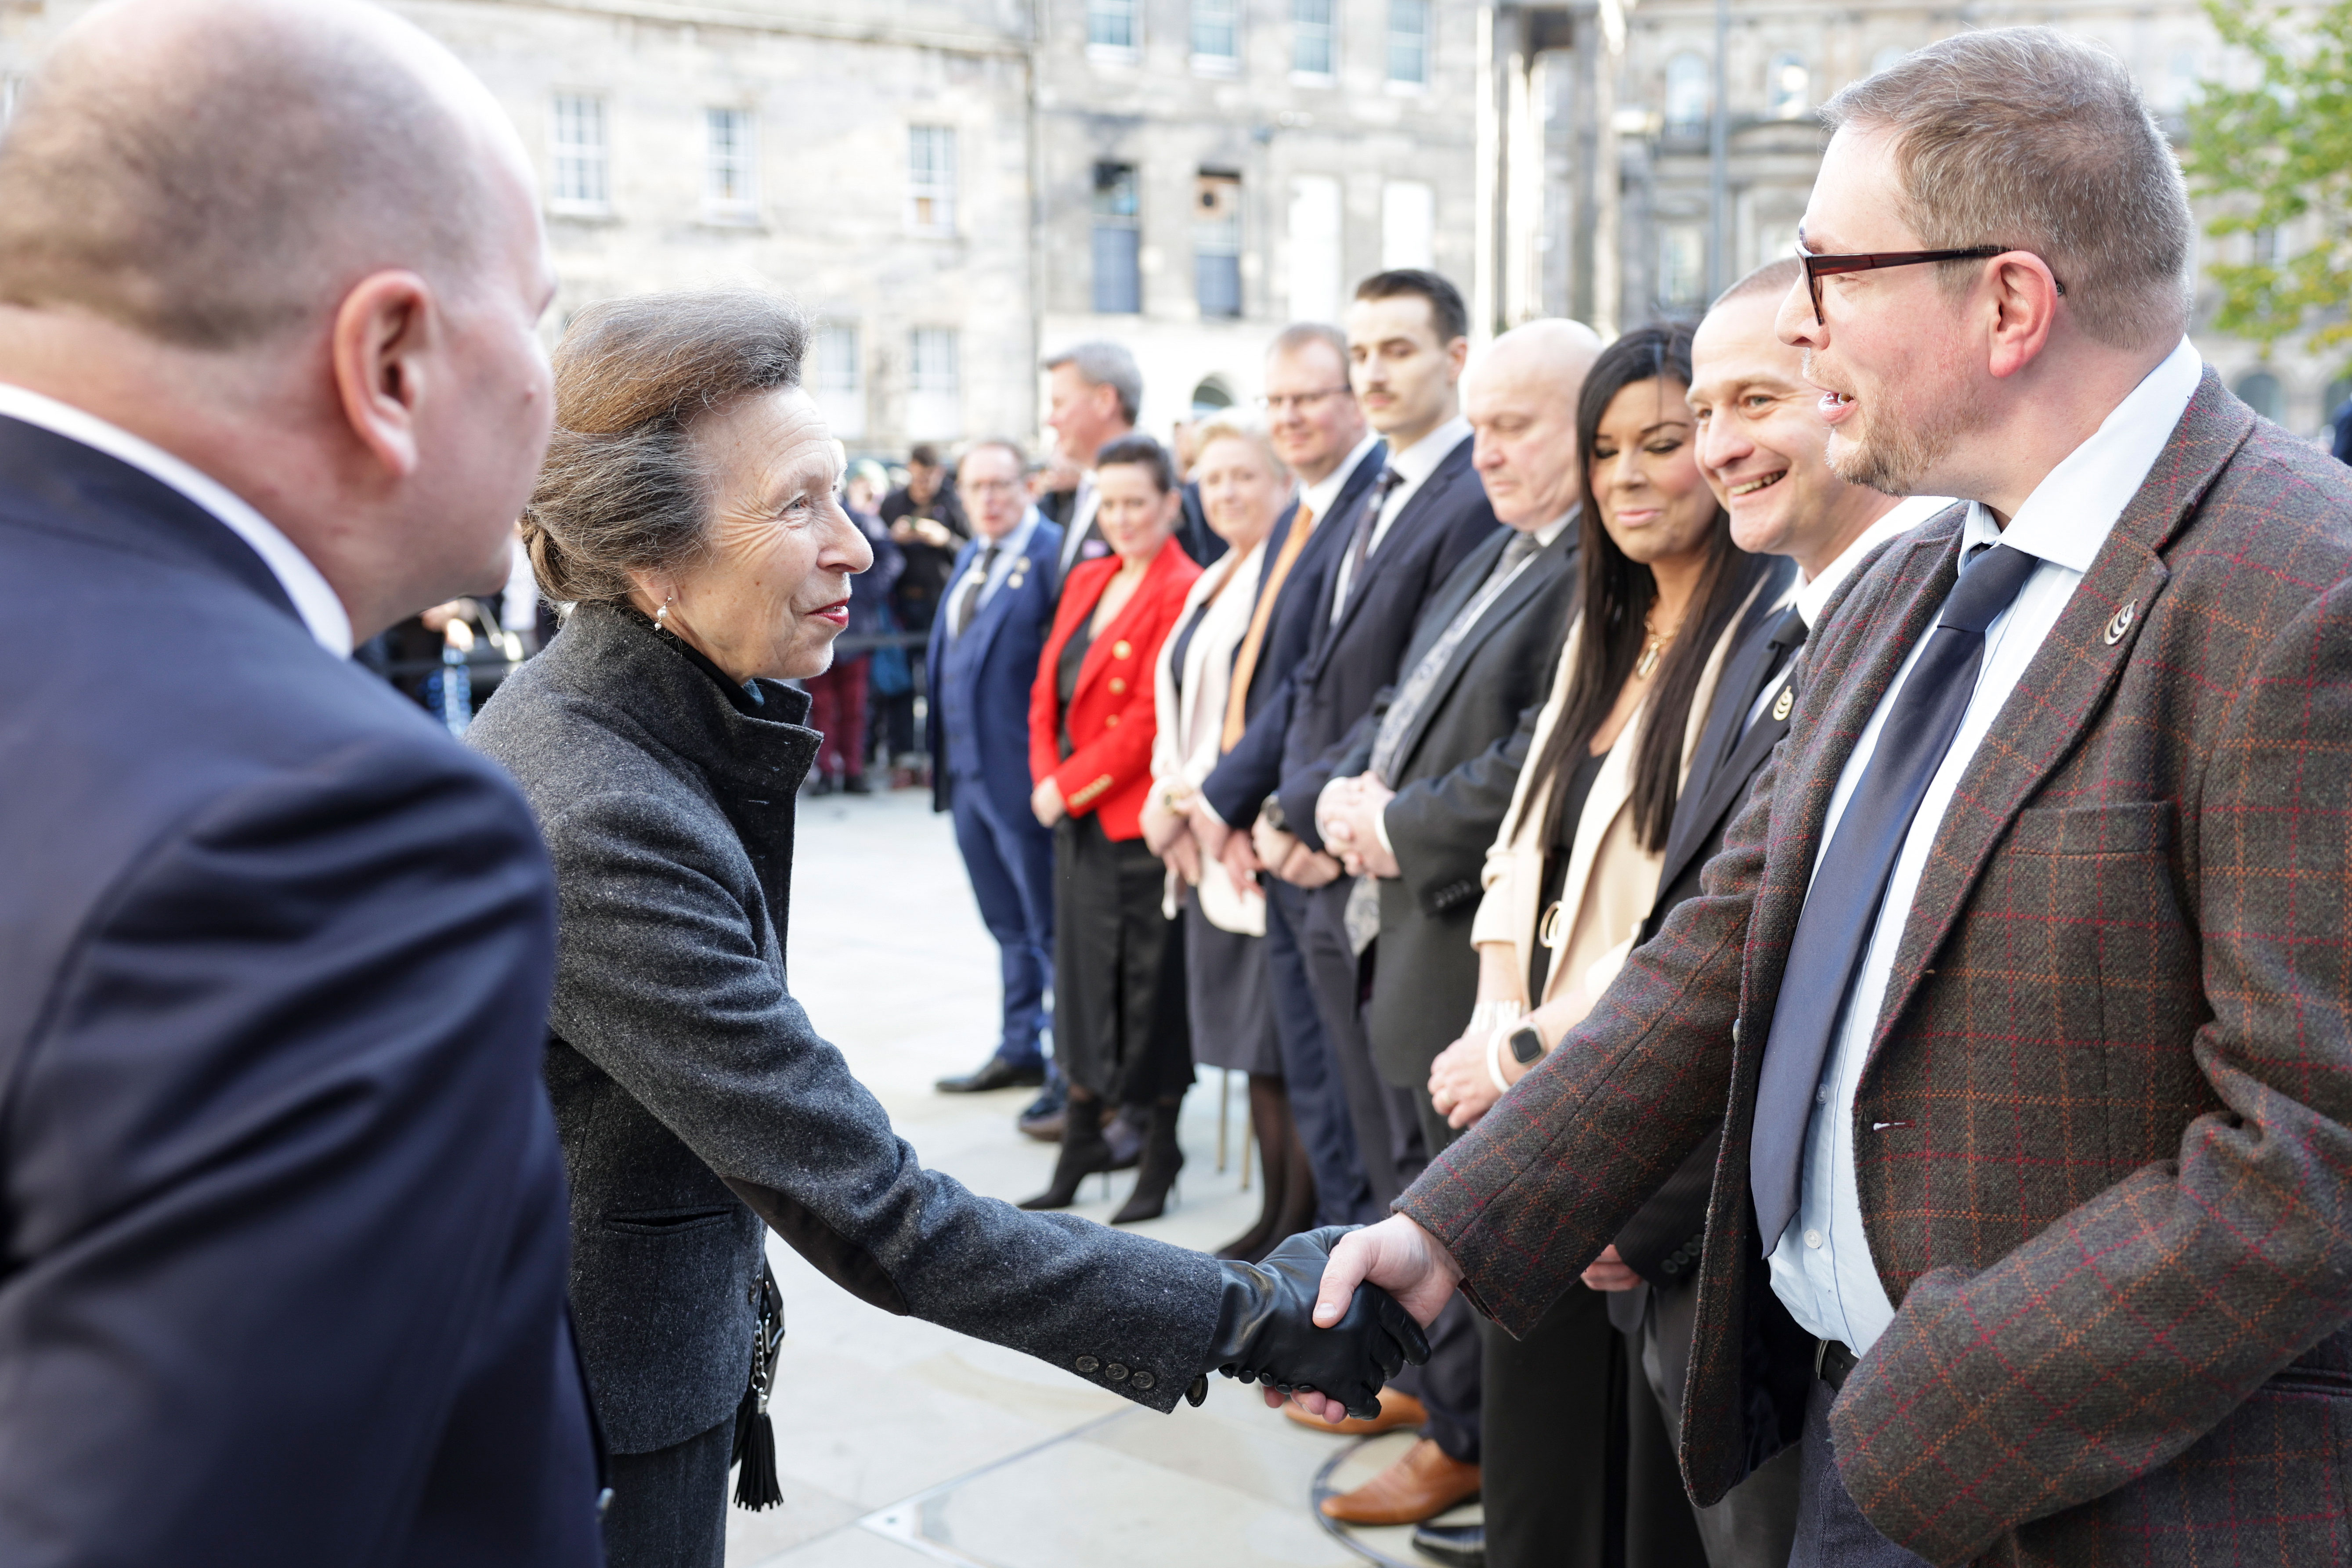 Her-Royal-Highness-The-Princess-Royal-meeting-people-that-worked-on-the-St-James-Quarter,-Edinburgh-project.jpg